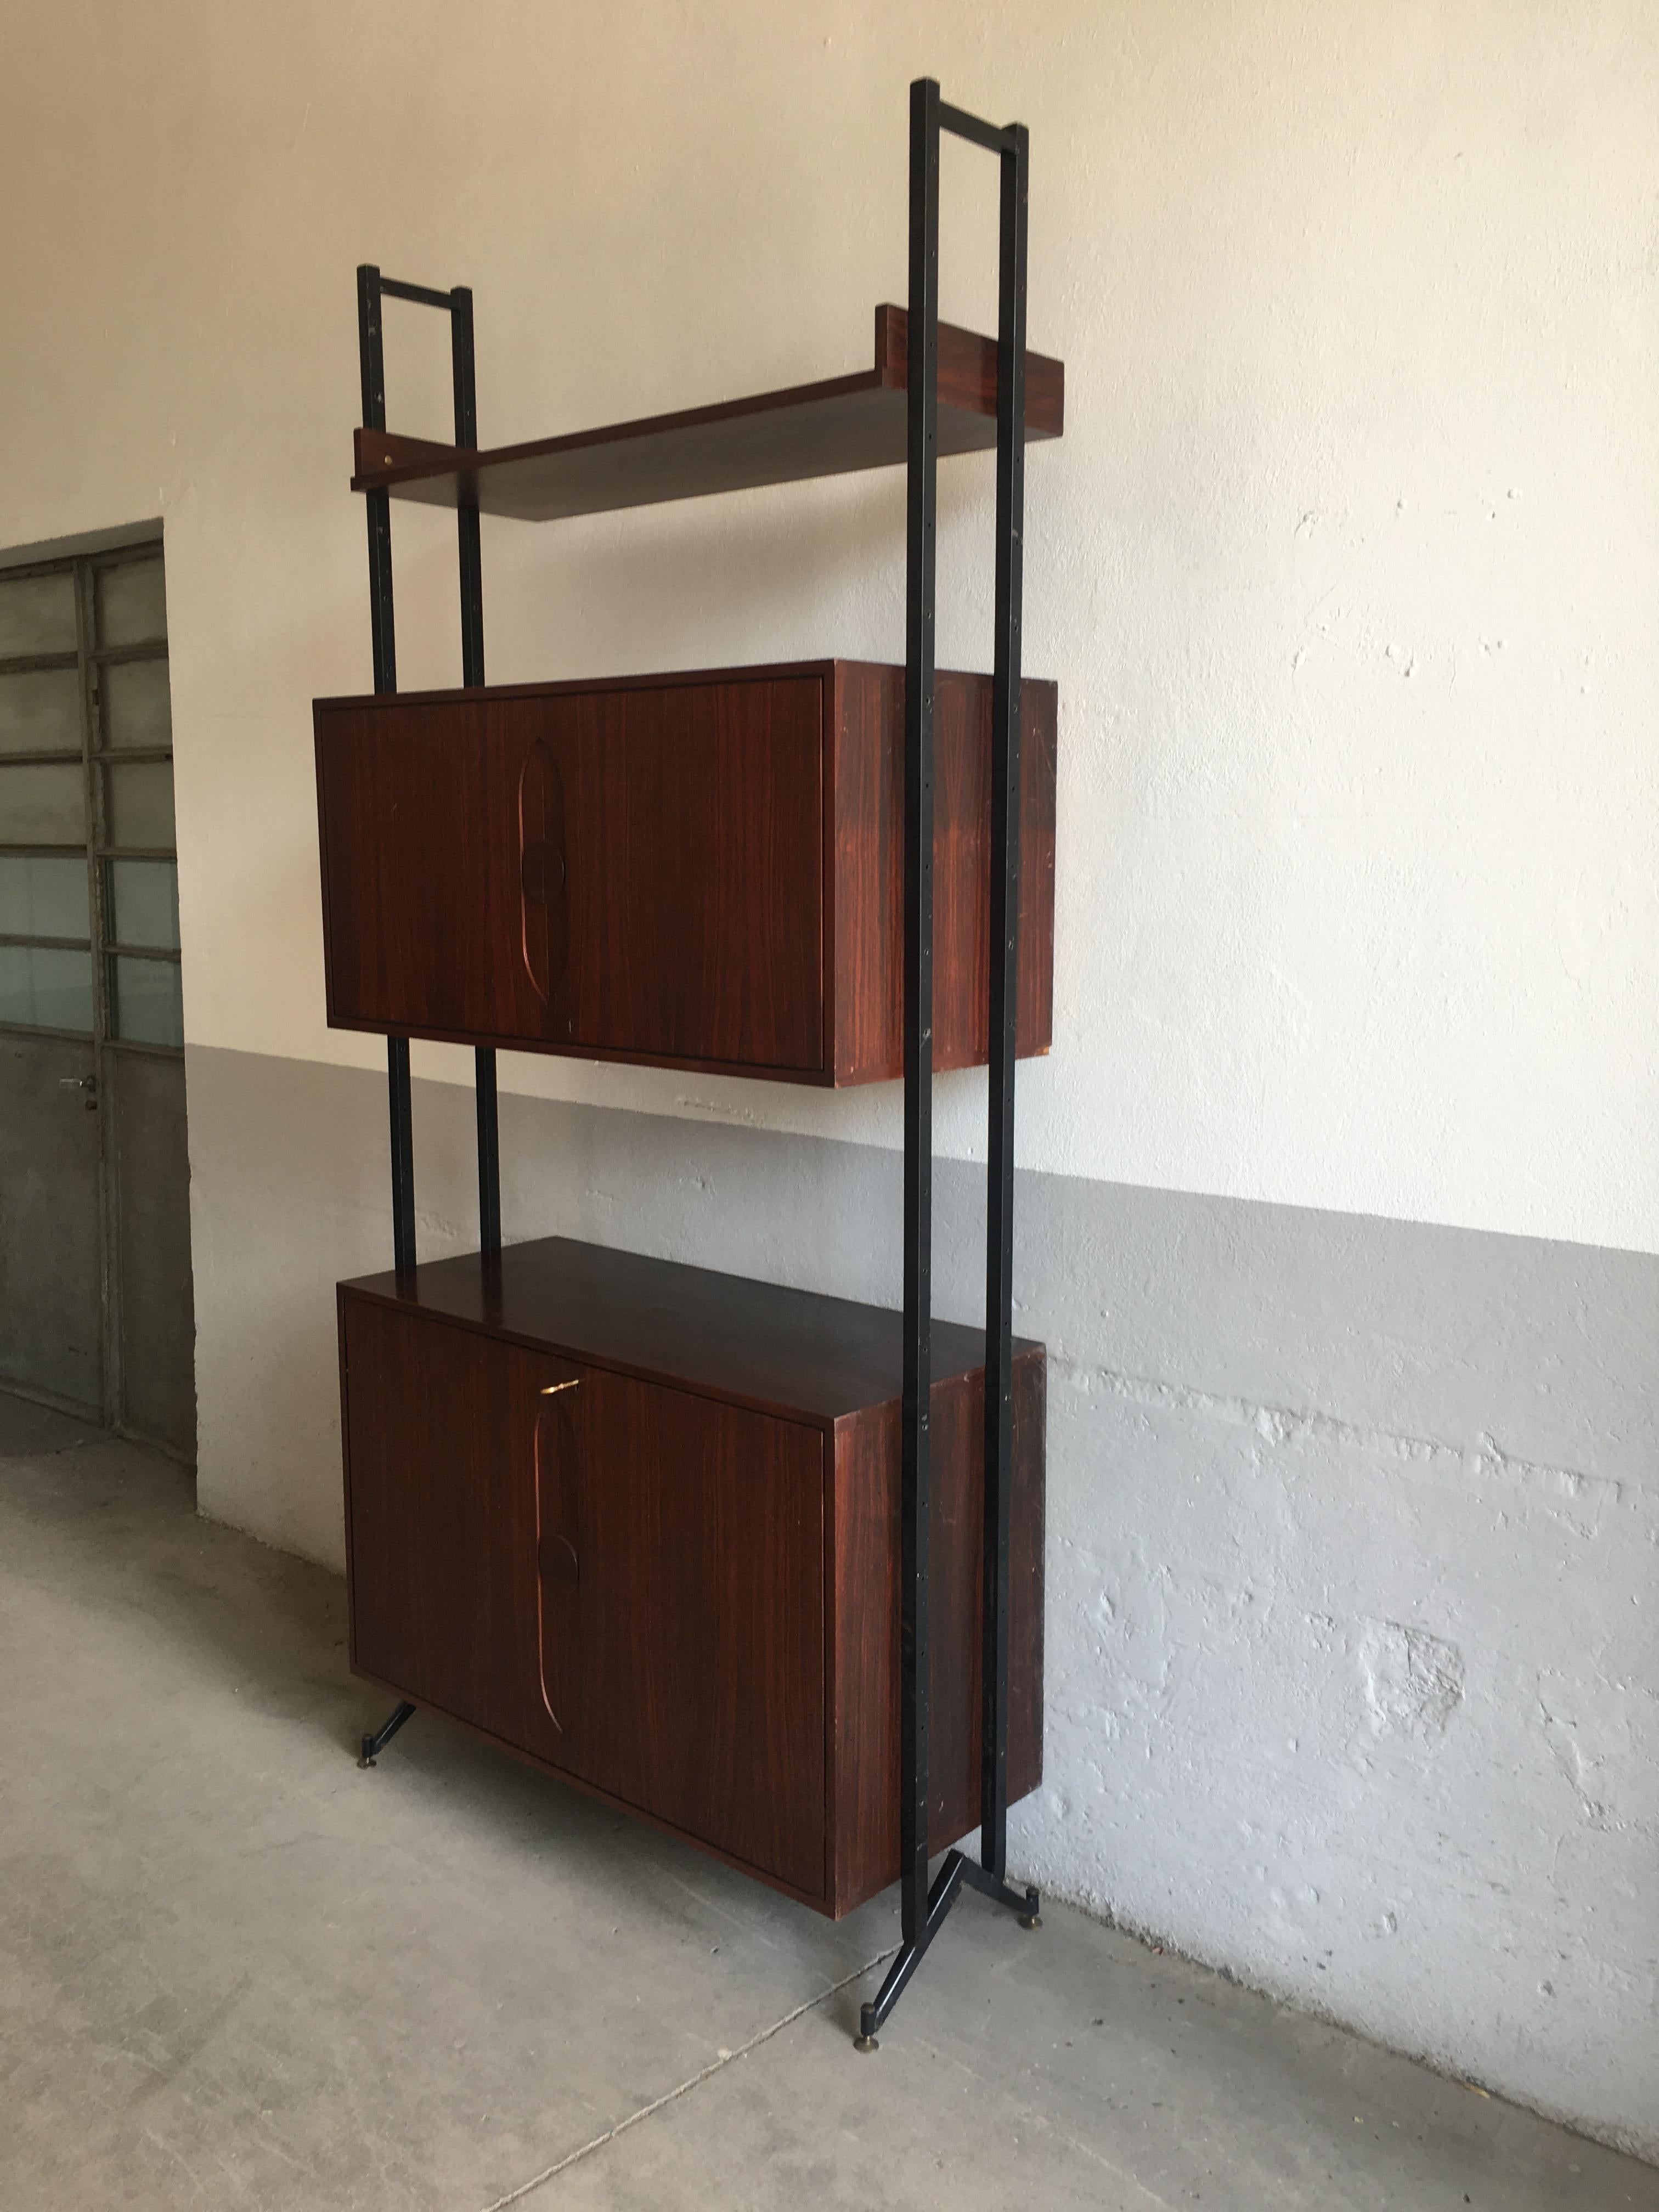 Late 20th Century Mid-Century Modern Dutch Wooden Bookcase with Shelf and Cabinets, 1970s For Sale